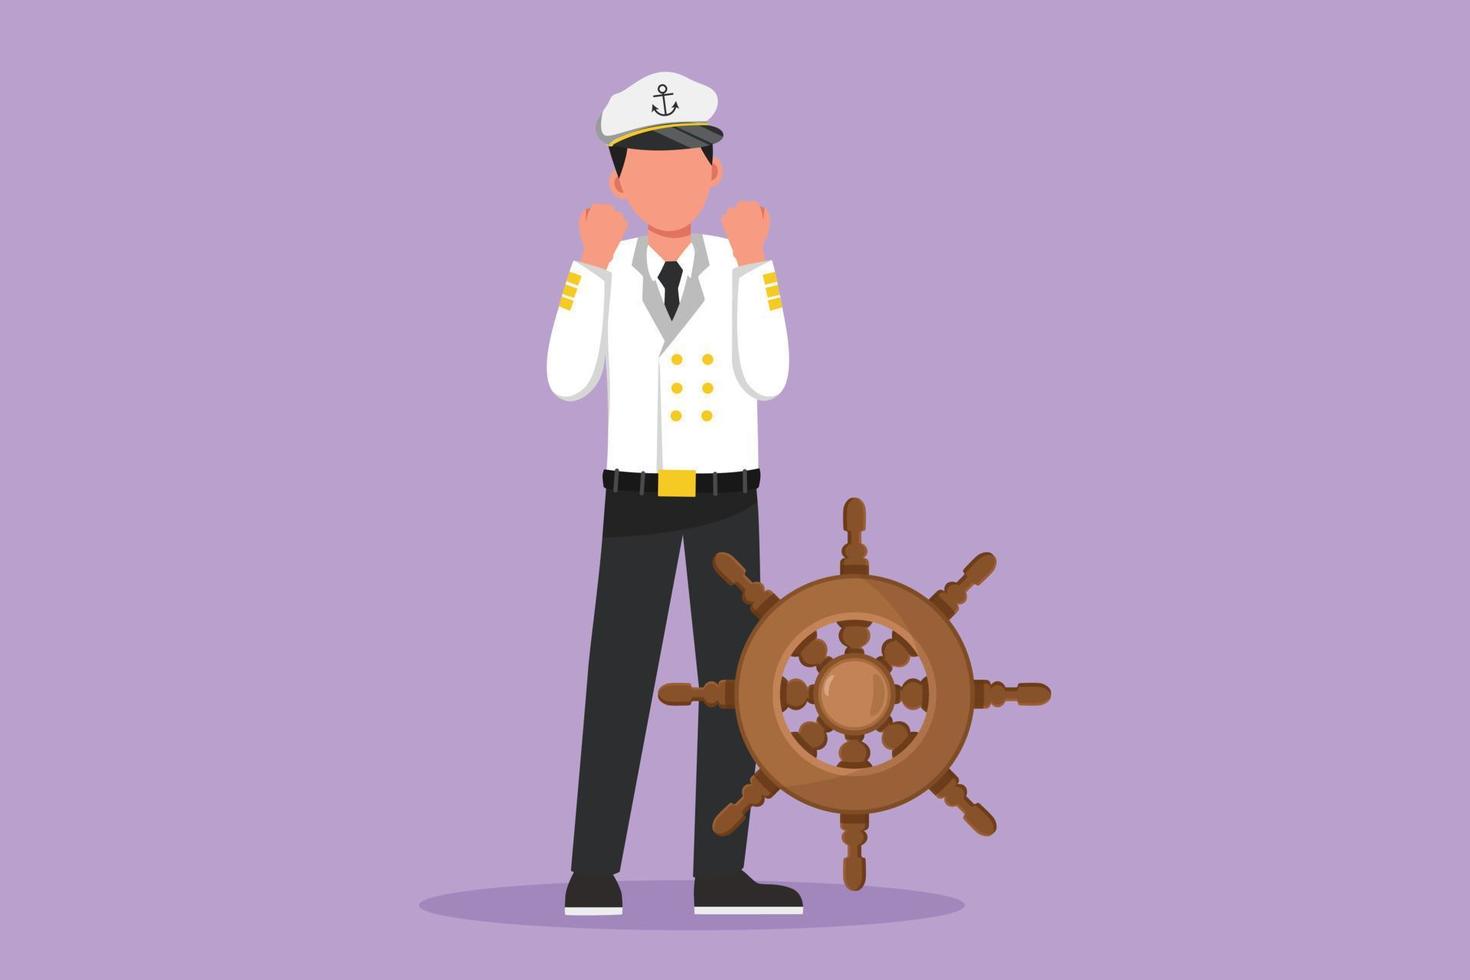 Graphic flat design drawing sailor man standing with celebrate gesture to be part of cruise ship, carrying passengers traveling across seas. Sailor on duty in ocean. Cartoon style vector illustration